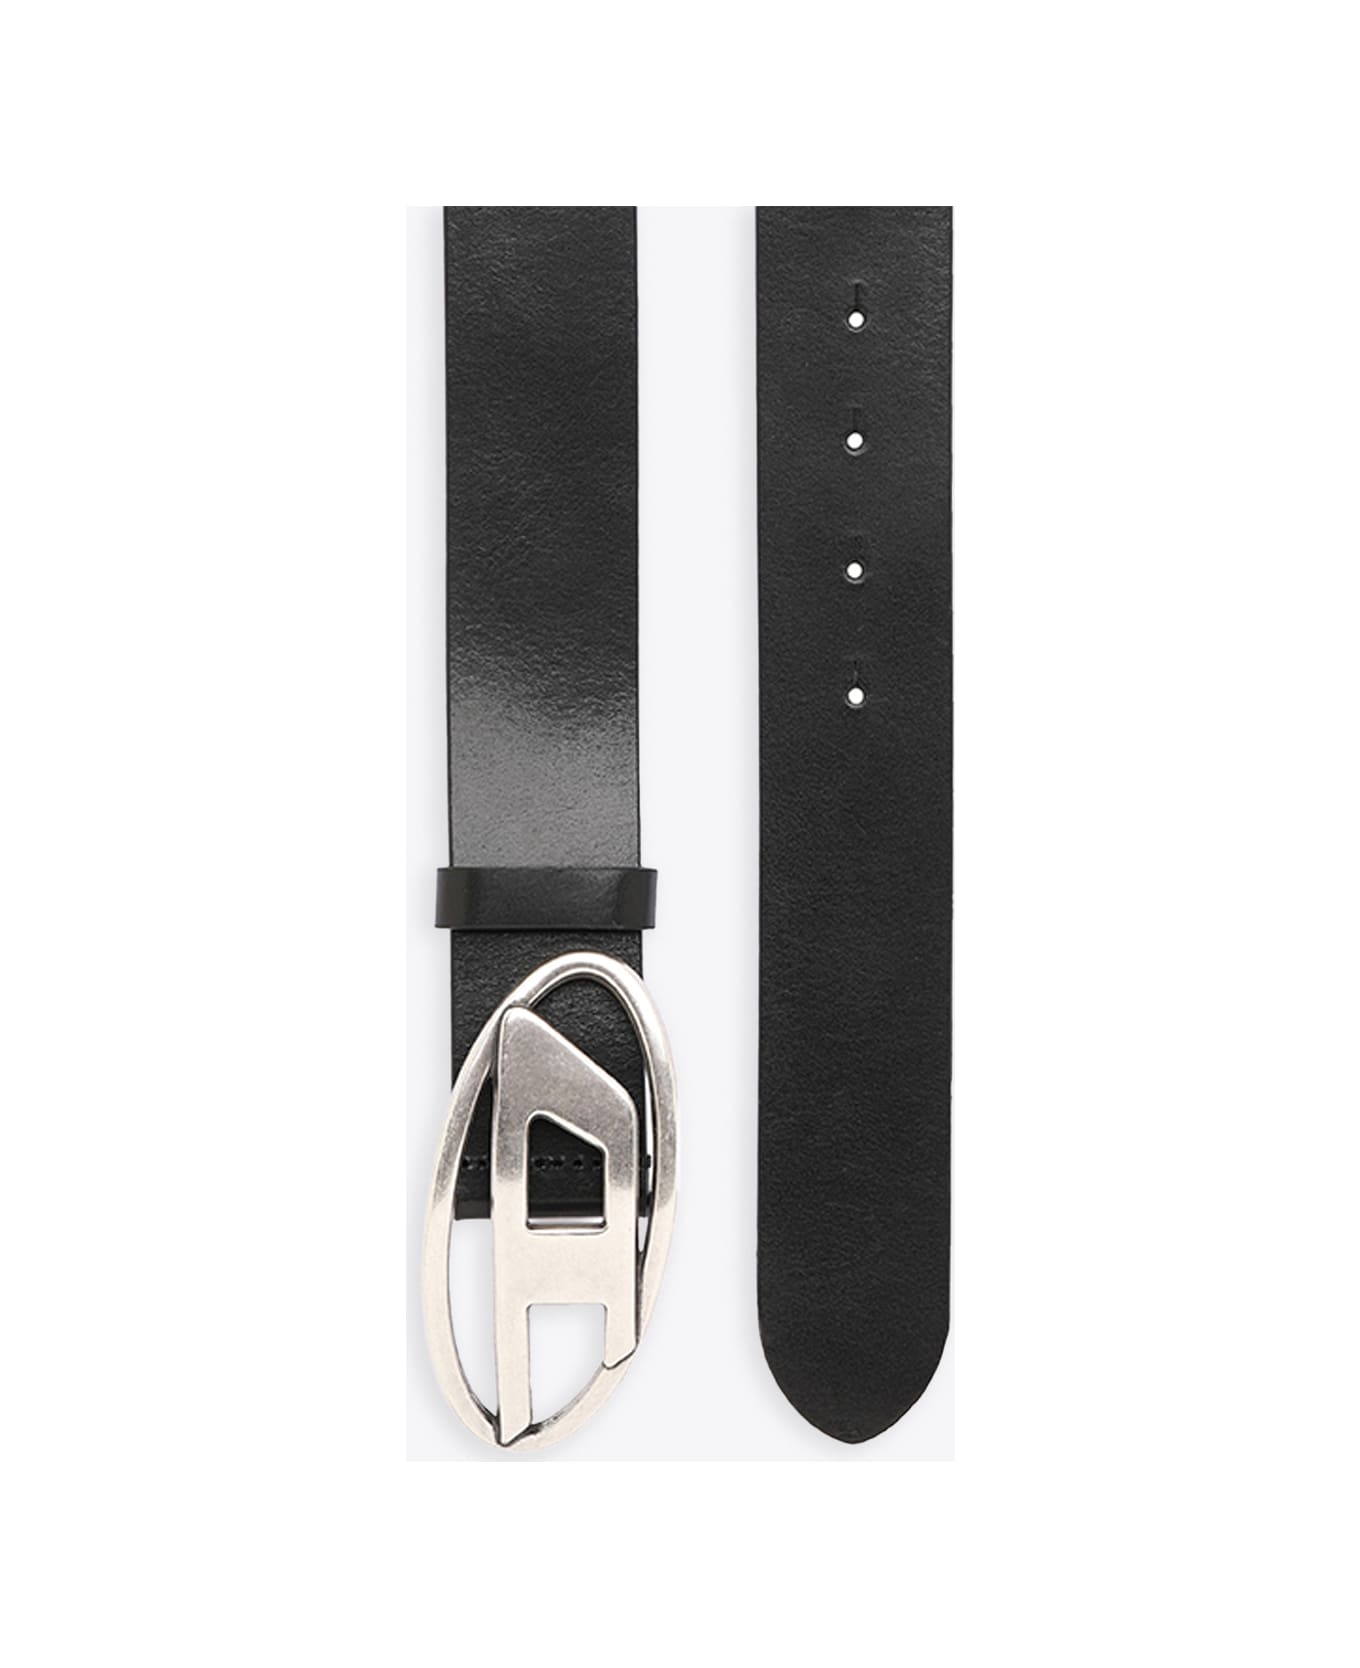 Diesel B-1dr Black leather belt with Oval D buckle - B 1DR - Nero